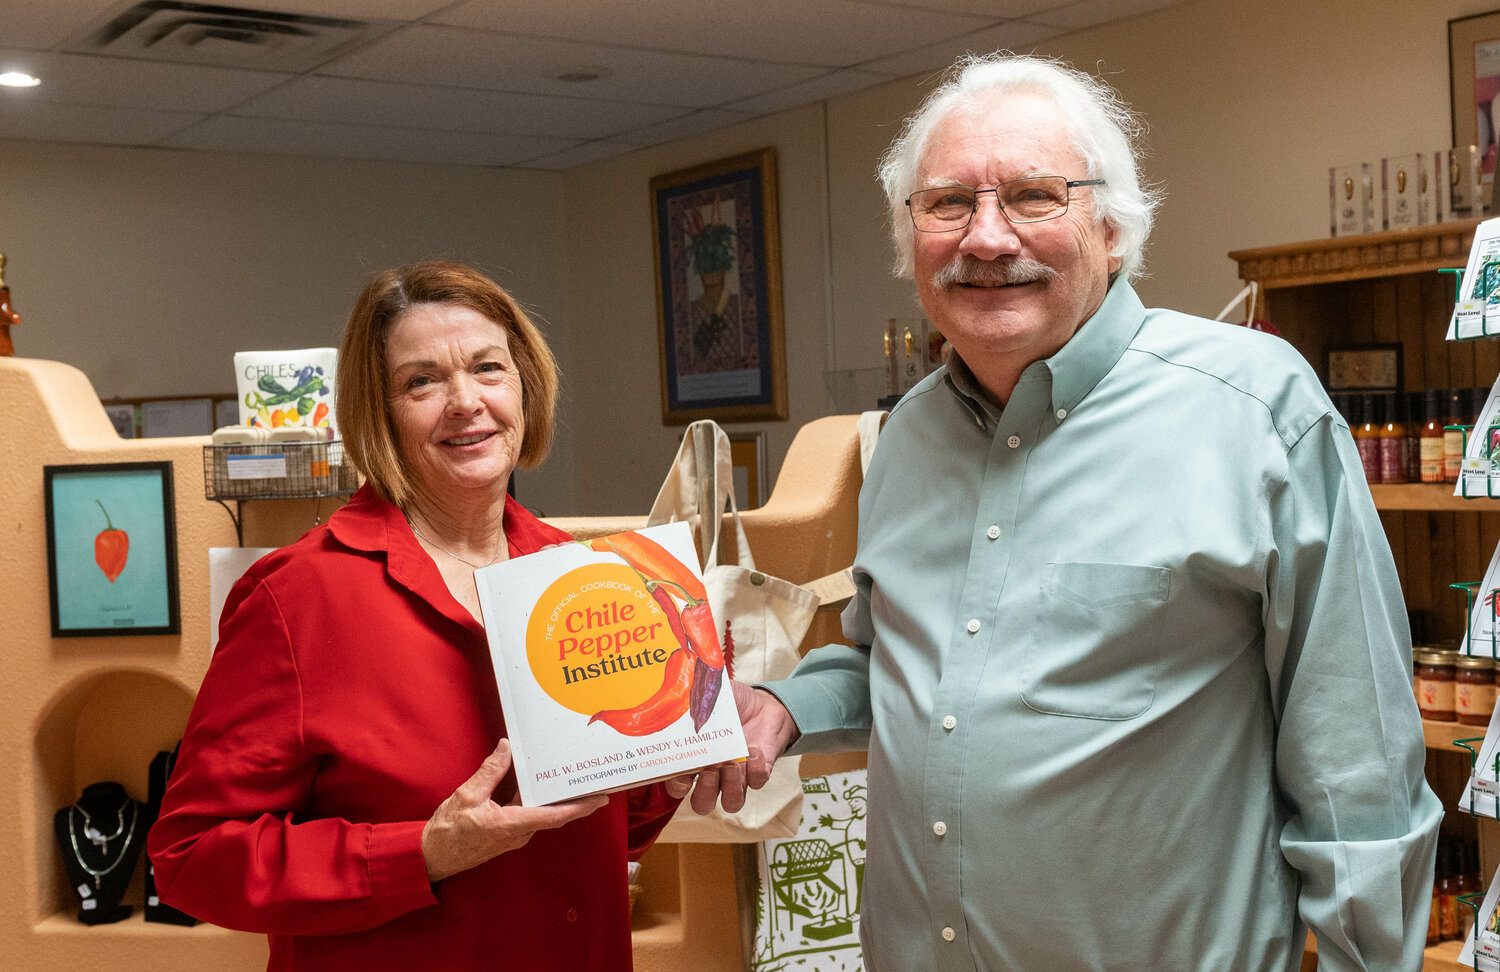 Wendy Hamilton and Paul Bosland, co authors of The Official Cookbook of the Chile Pepper Institute.